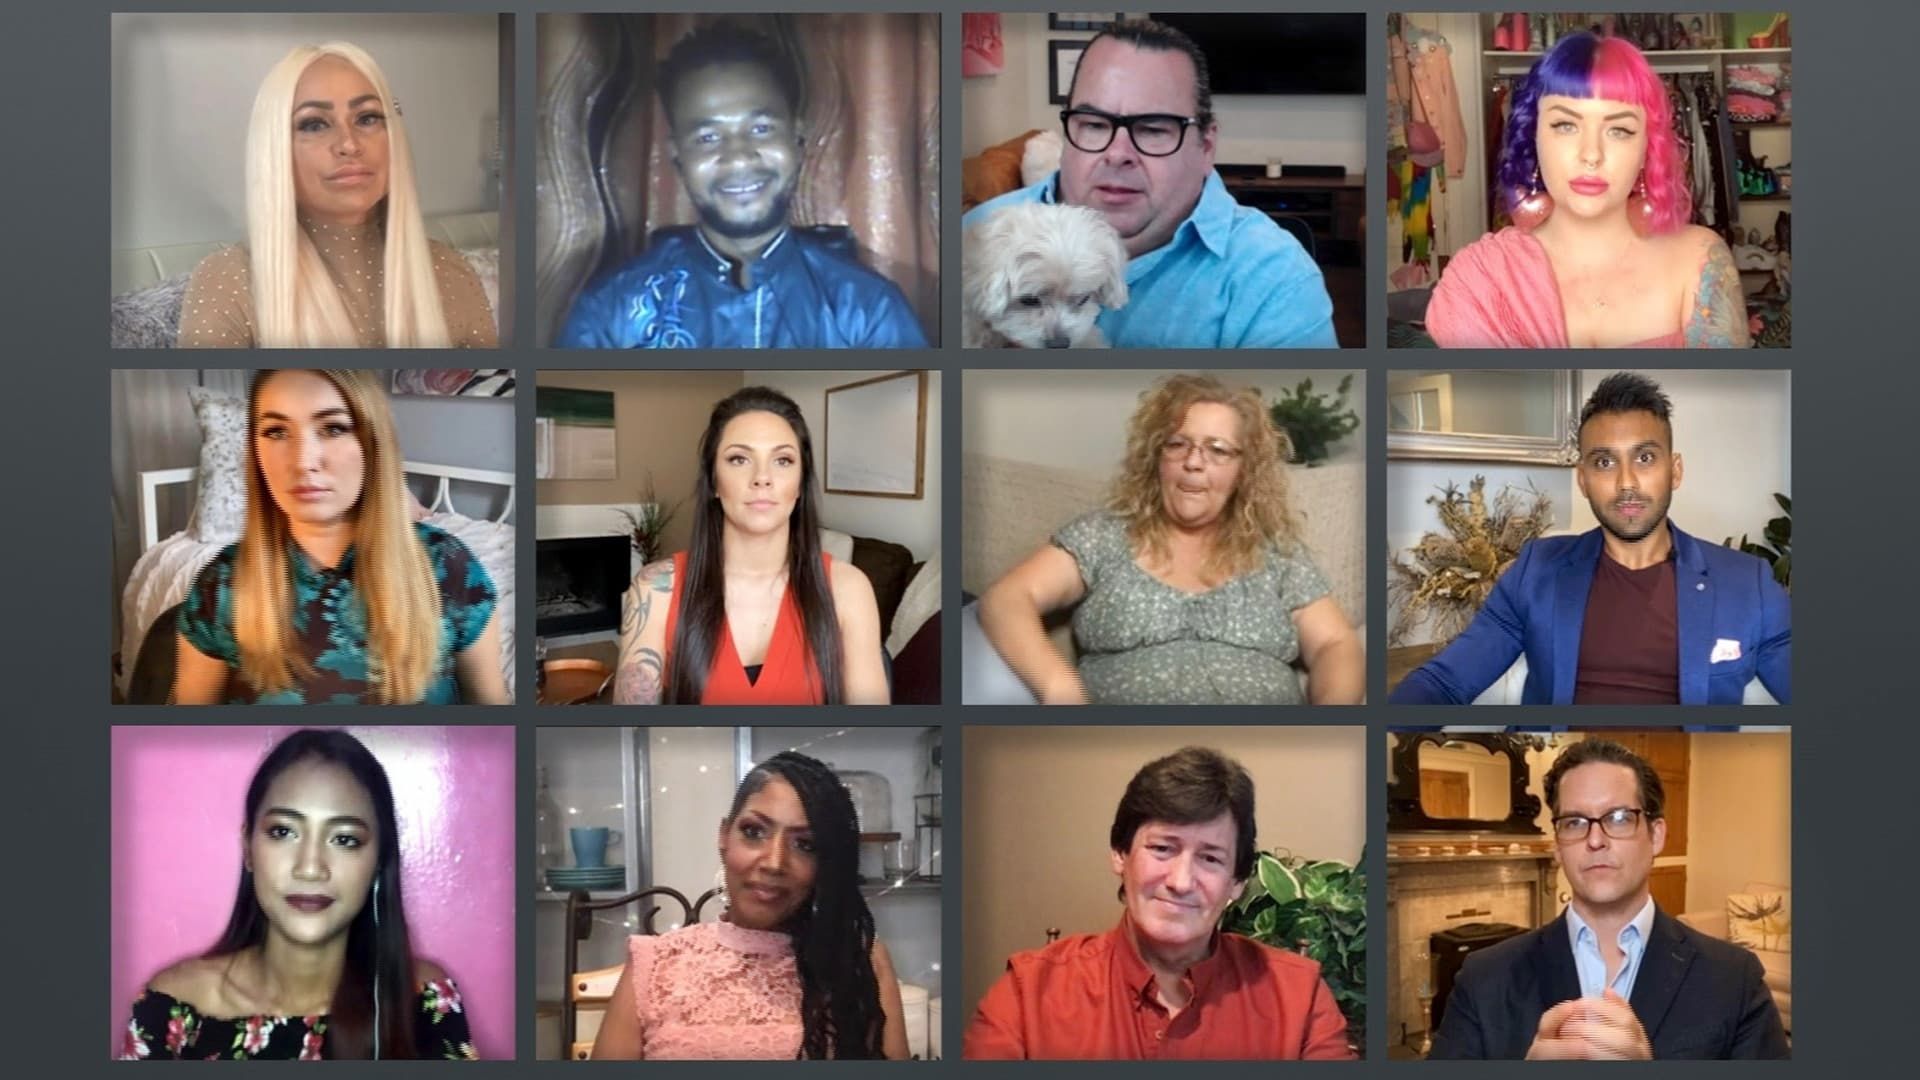 90 Day Fiancé: Before the 90 Days background